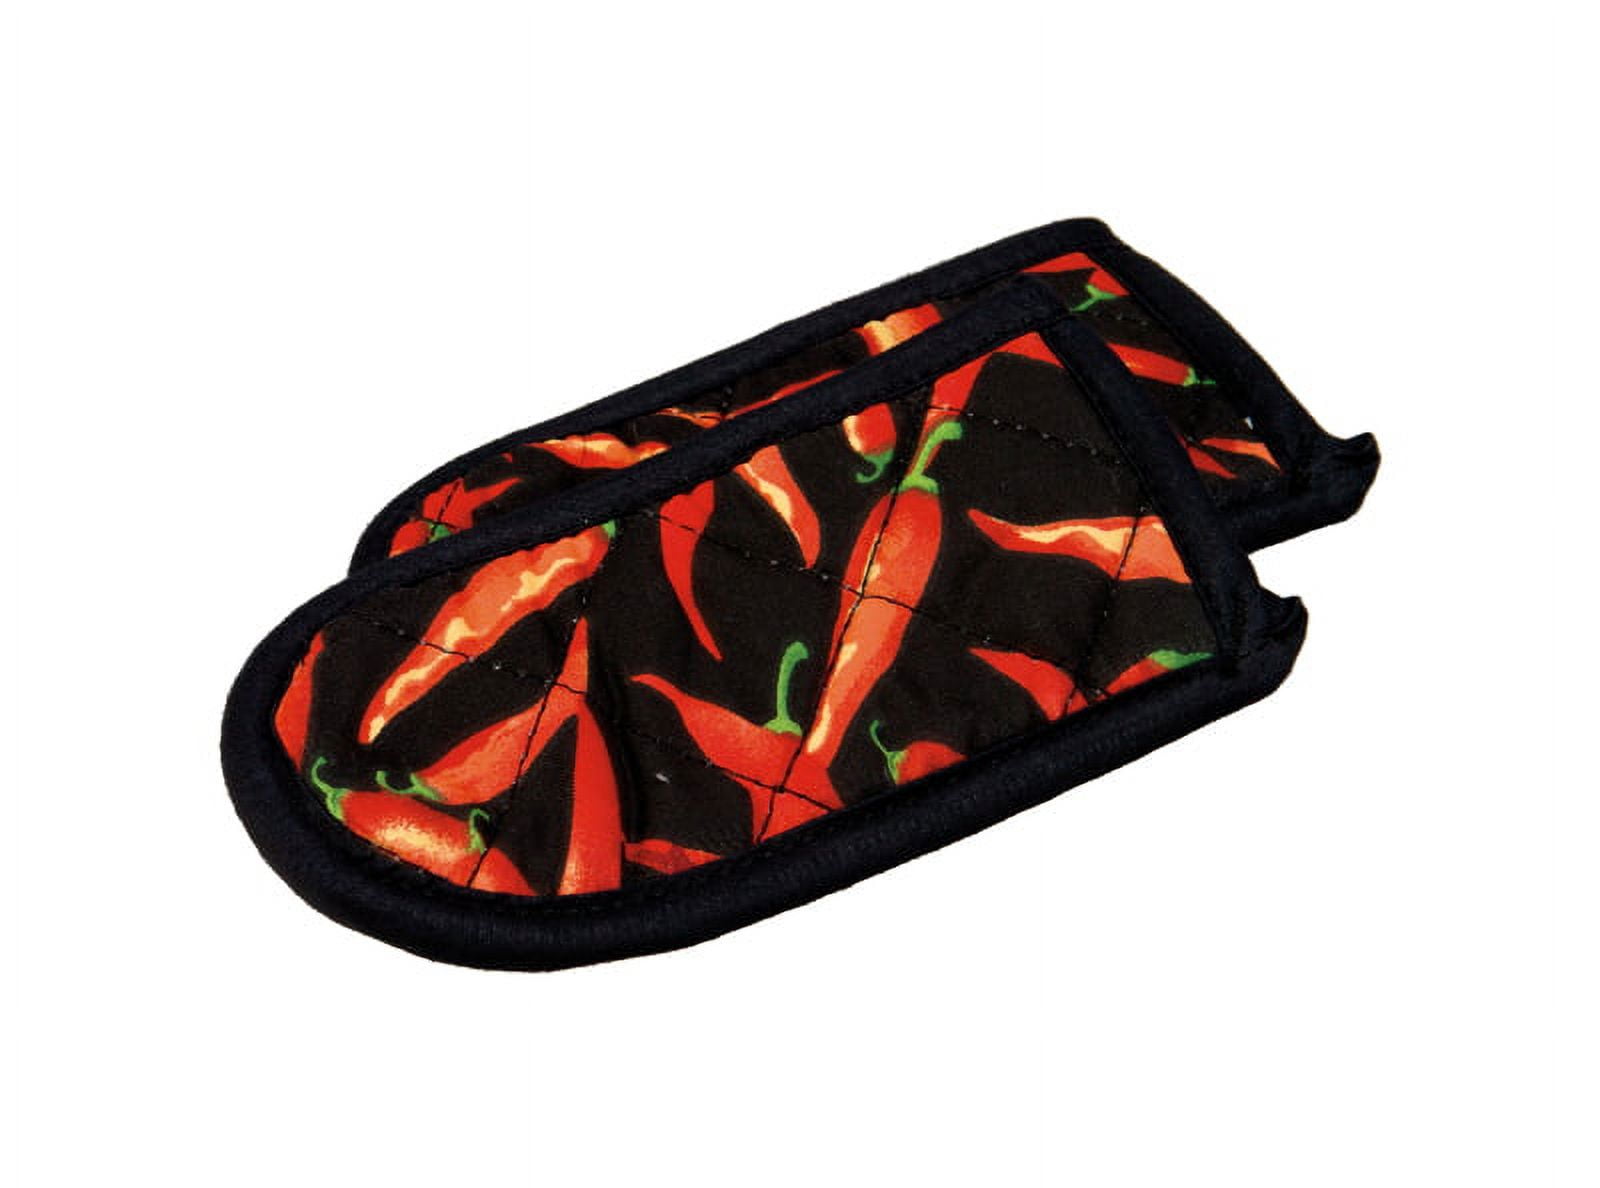 Choice Chili Pepper Pan Handle Covers - 12/Pack